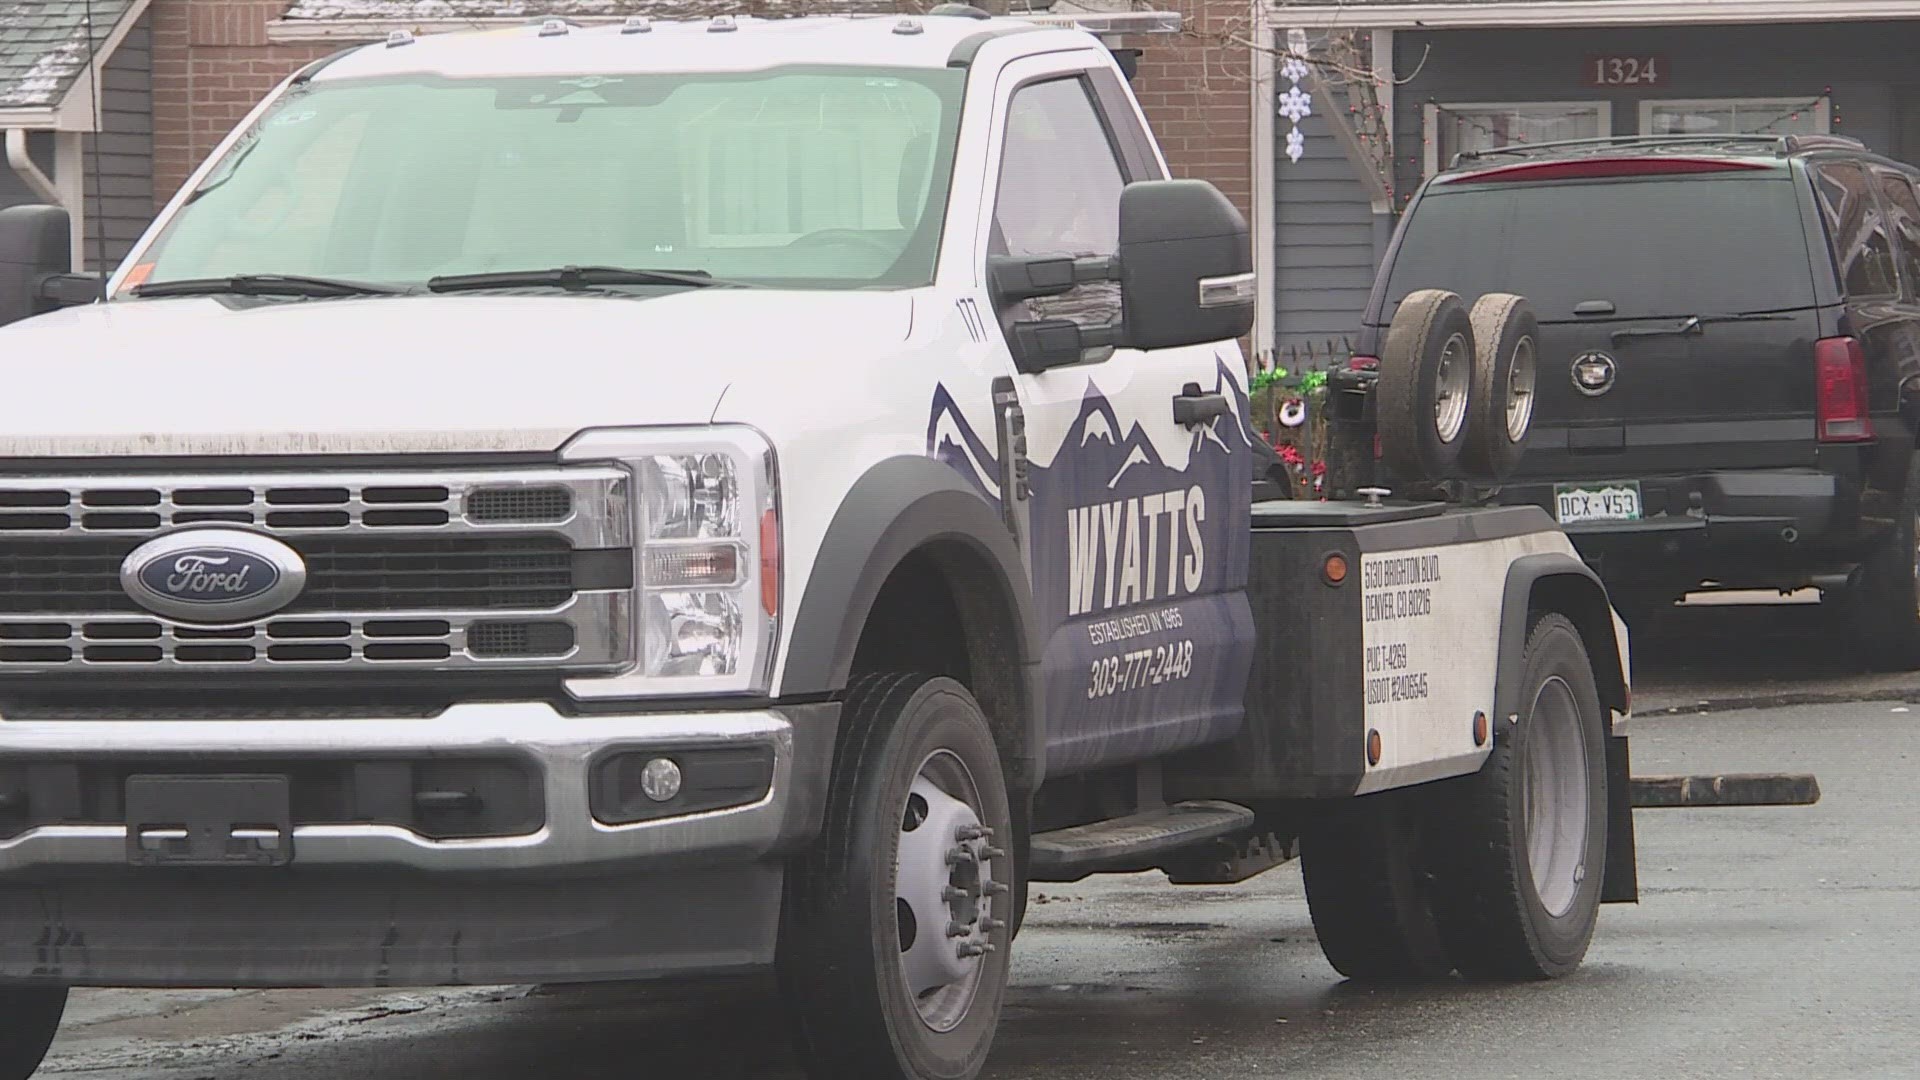 Wyatt's Towing denied all the allegations made by the Colorado Attorney General Phil Weiser's office after its months-long investigation into the company.